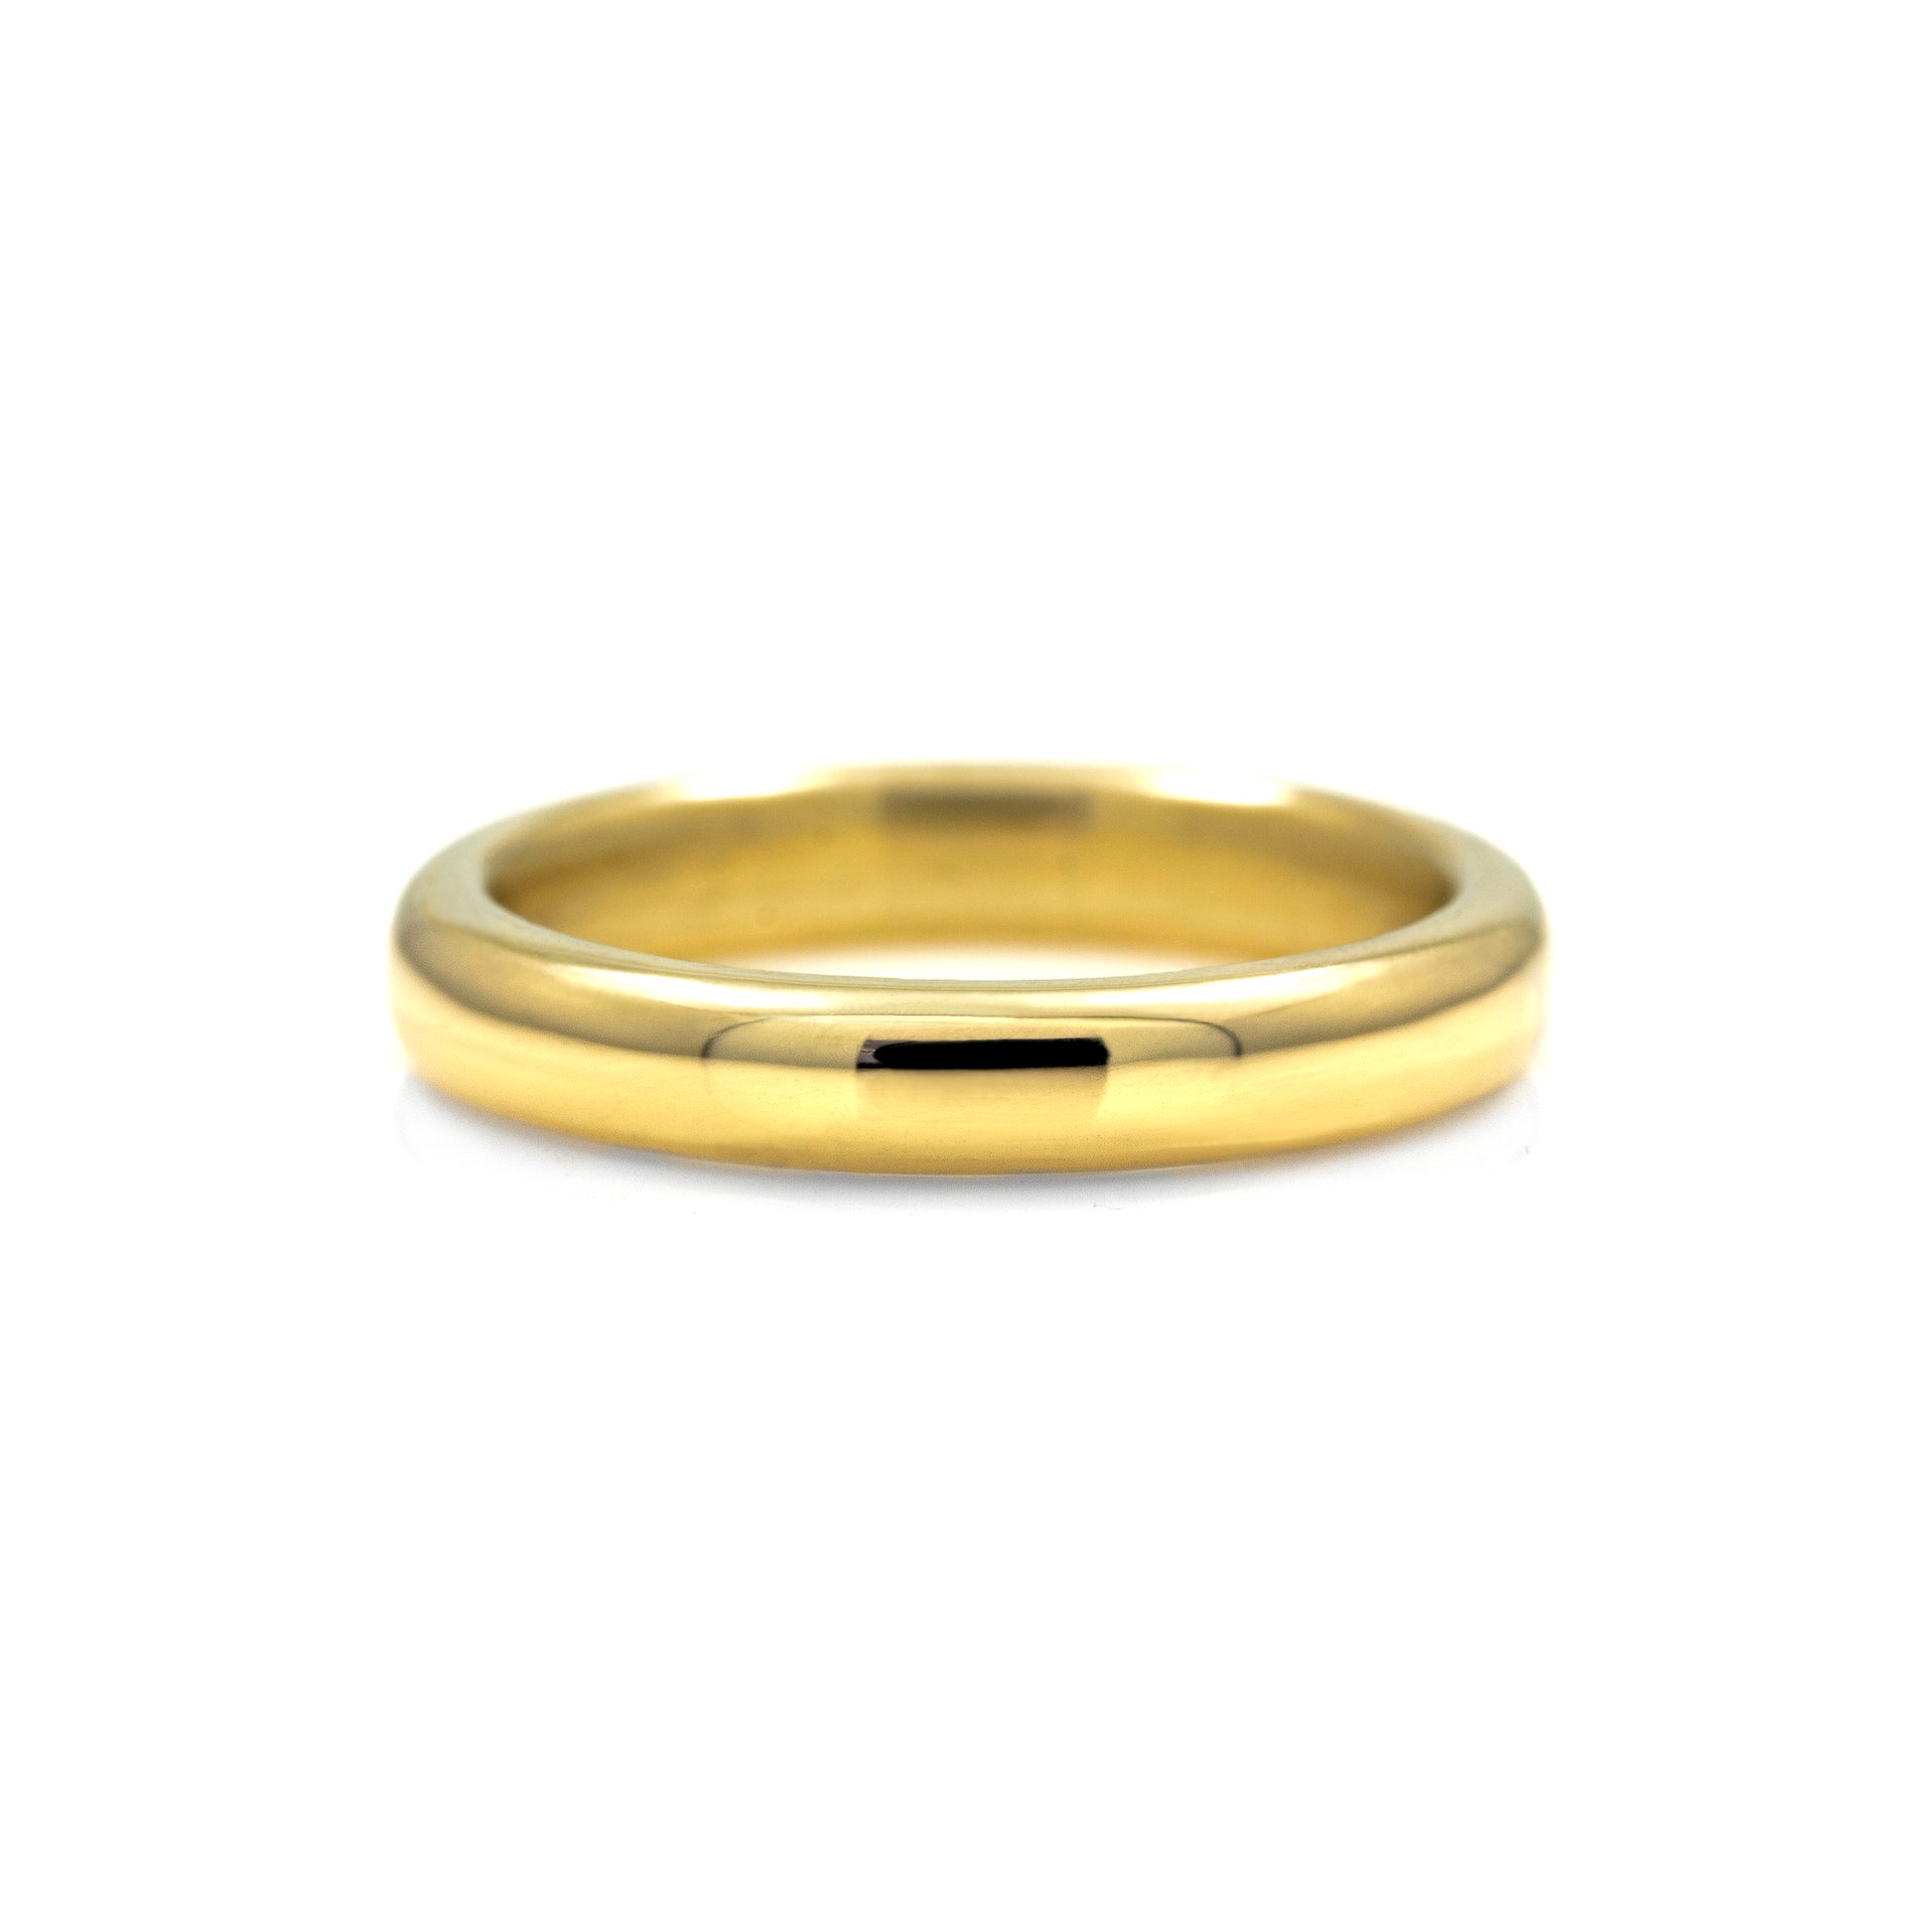 Court shaped wedding band recycled yellow gold